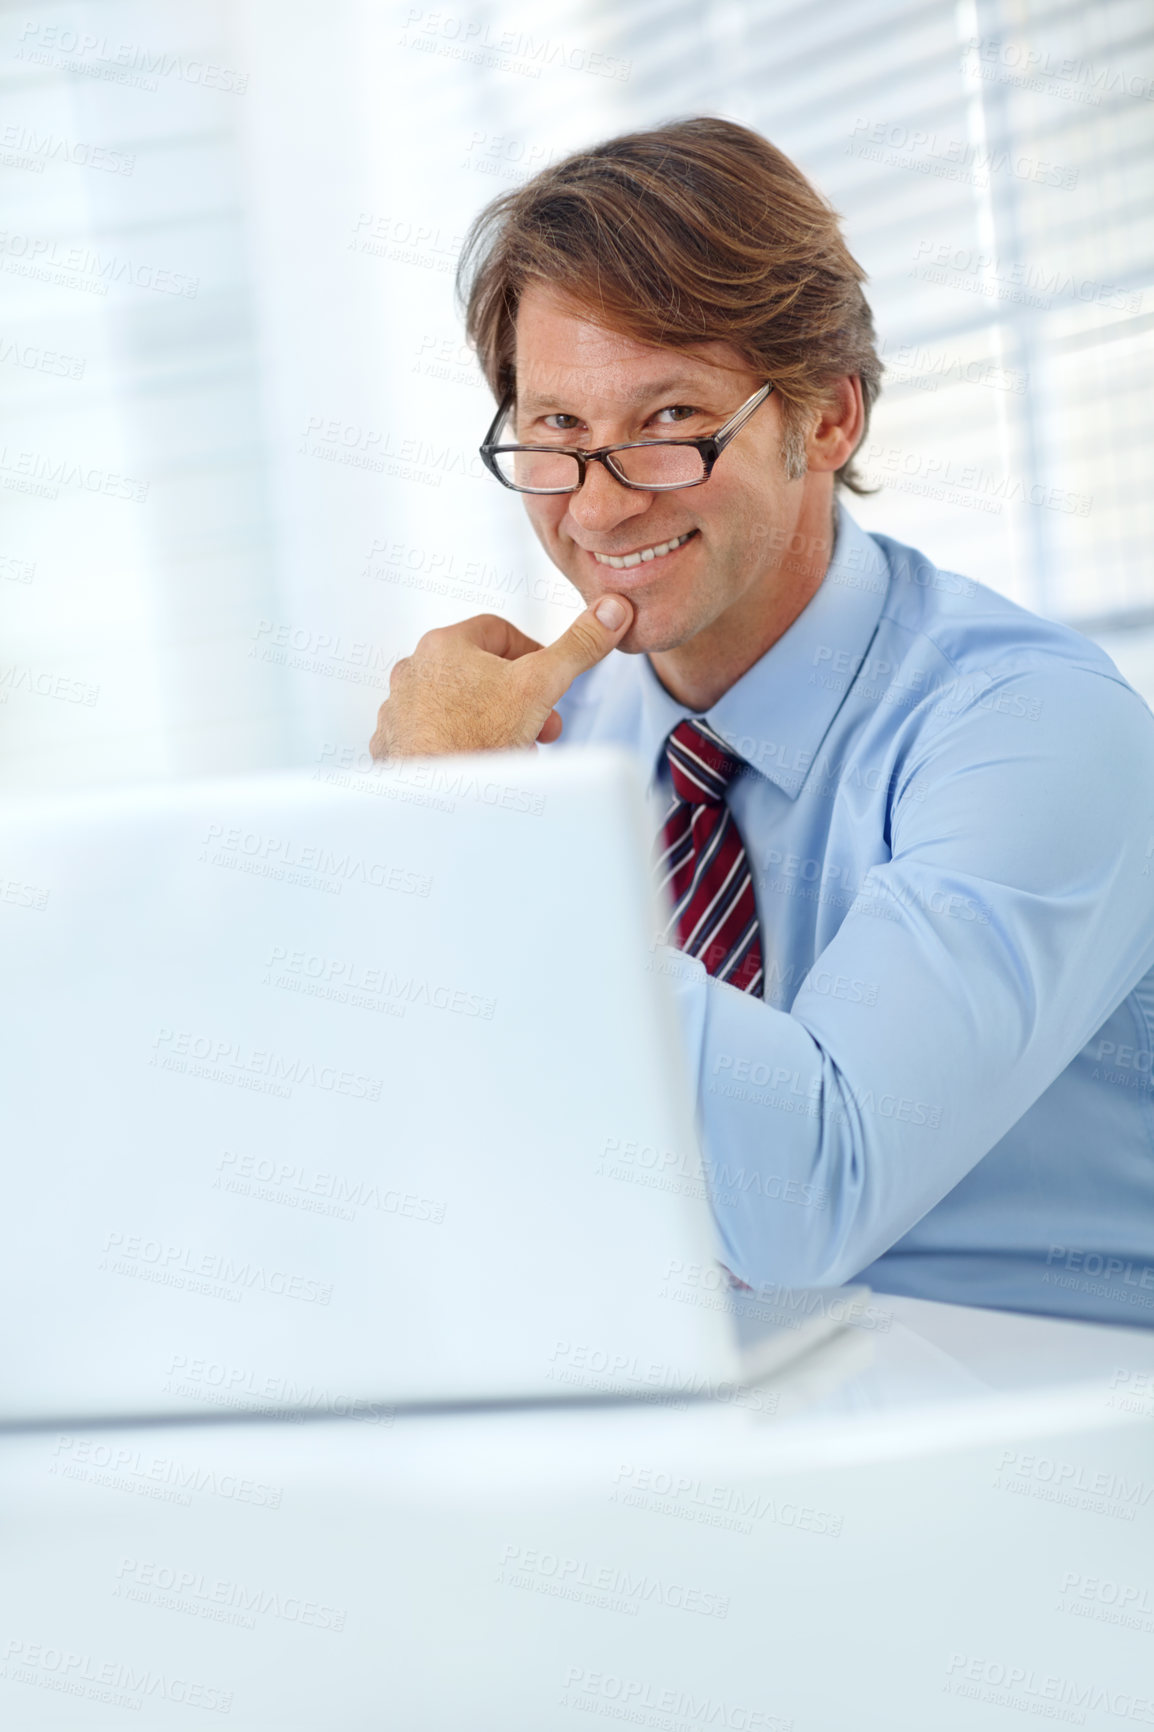 Buy stock photo Portrait of a smiling mature businessman working at his laptop